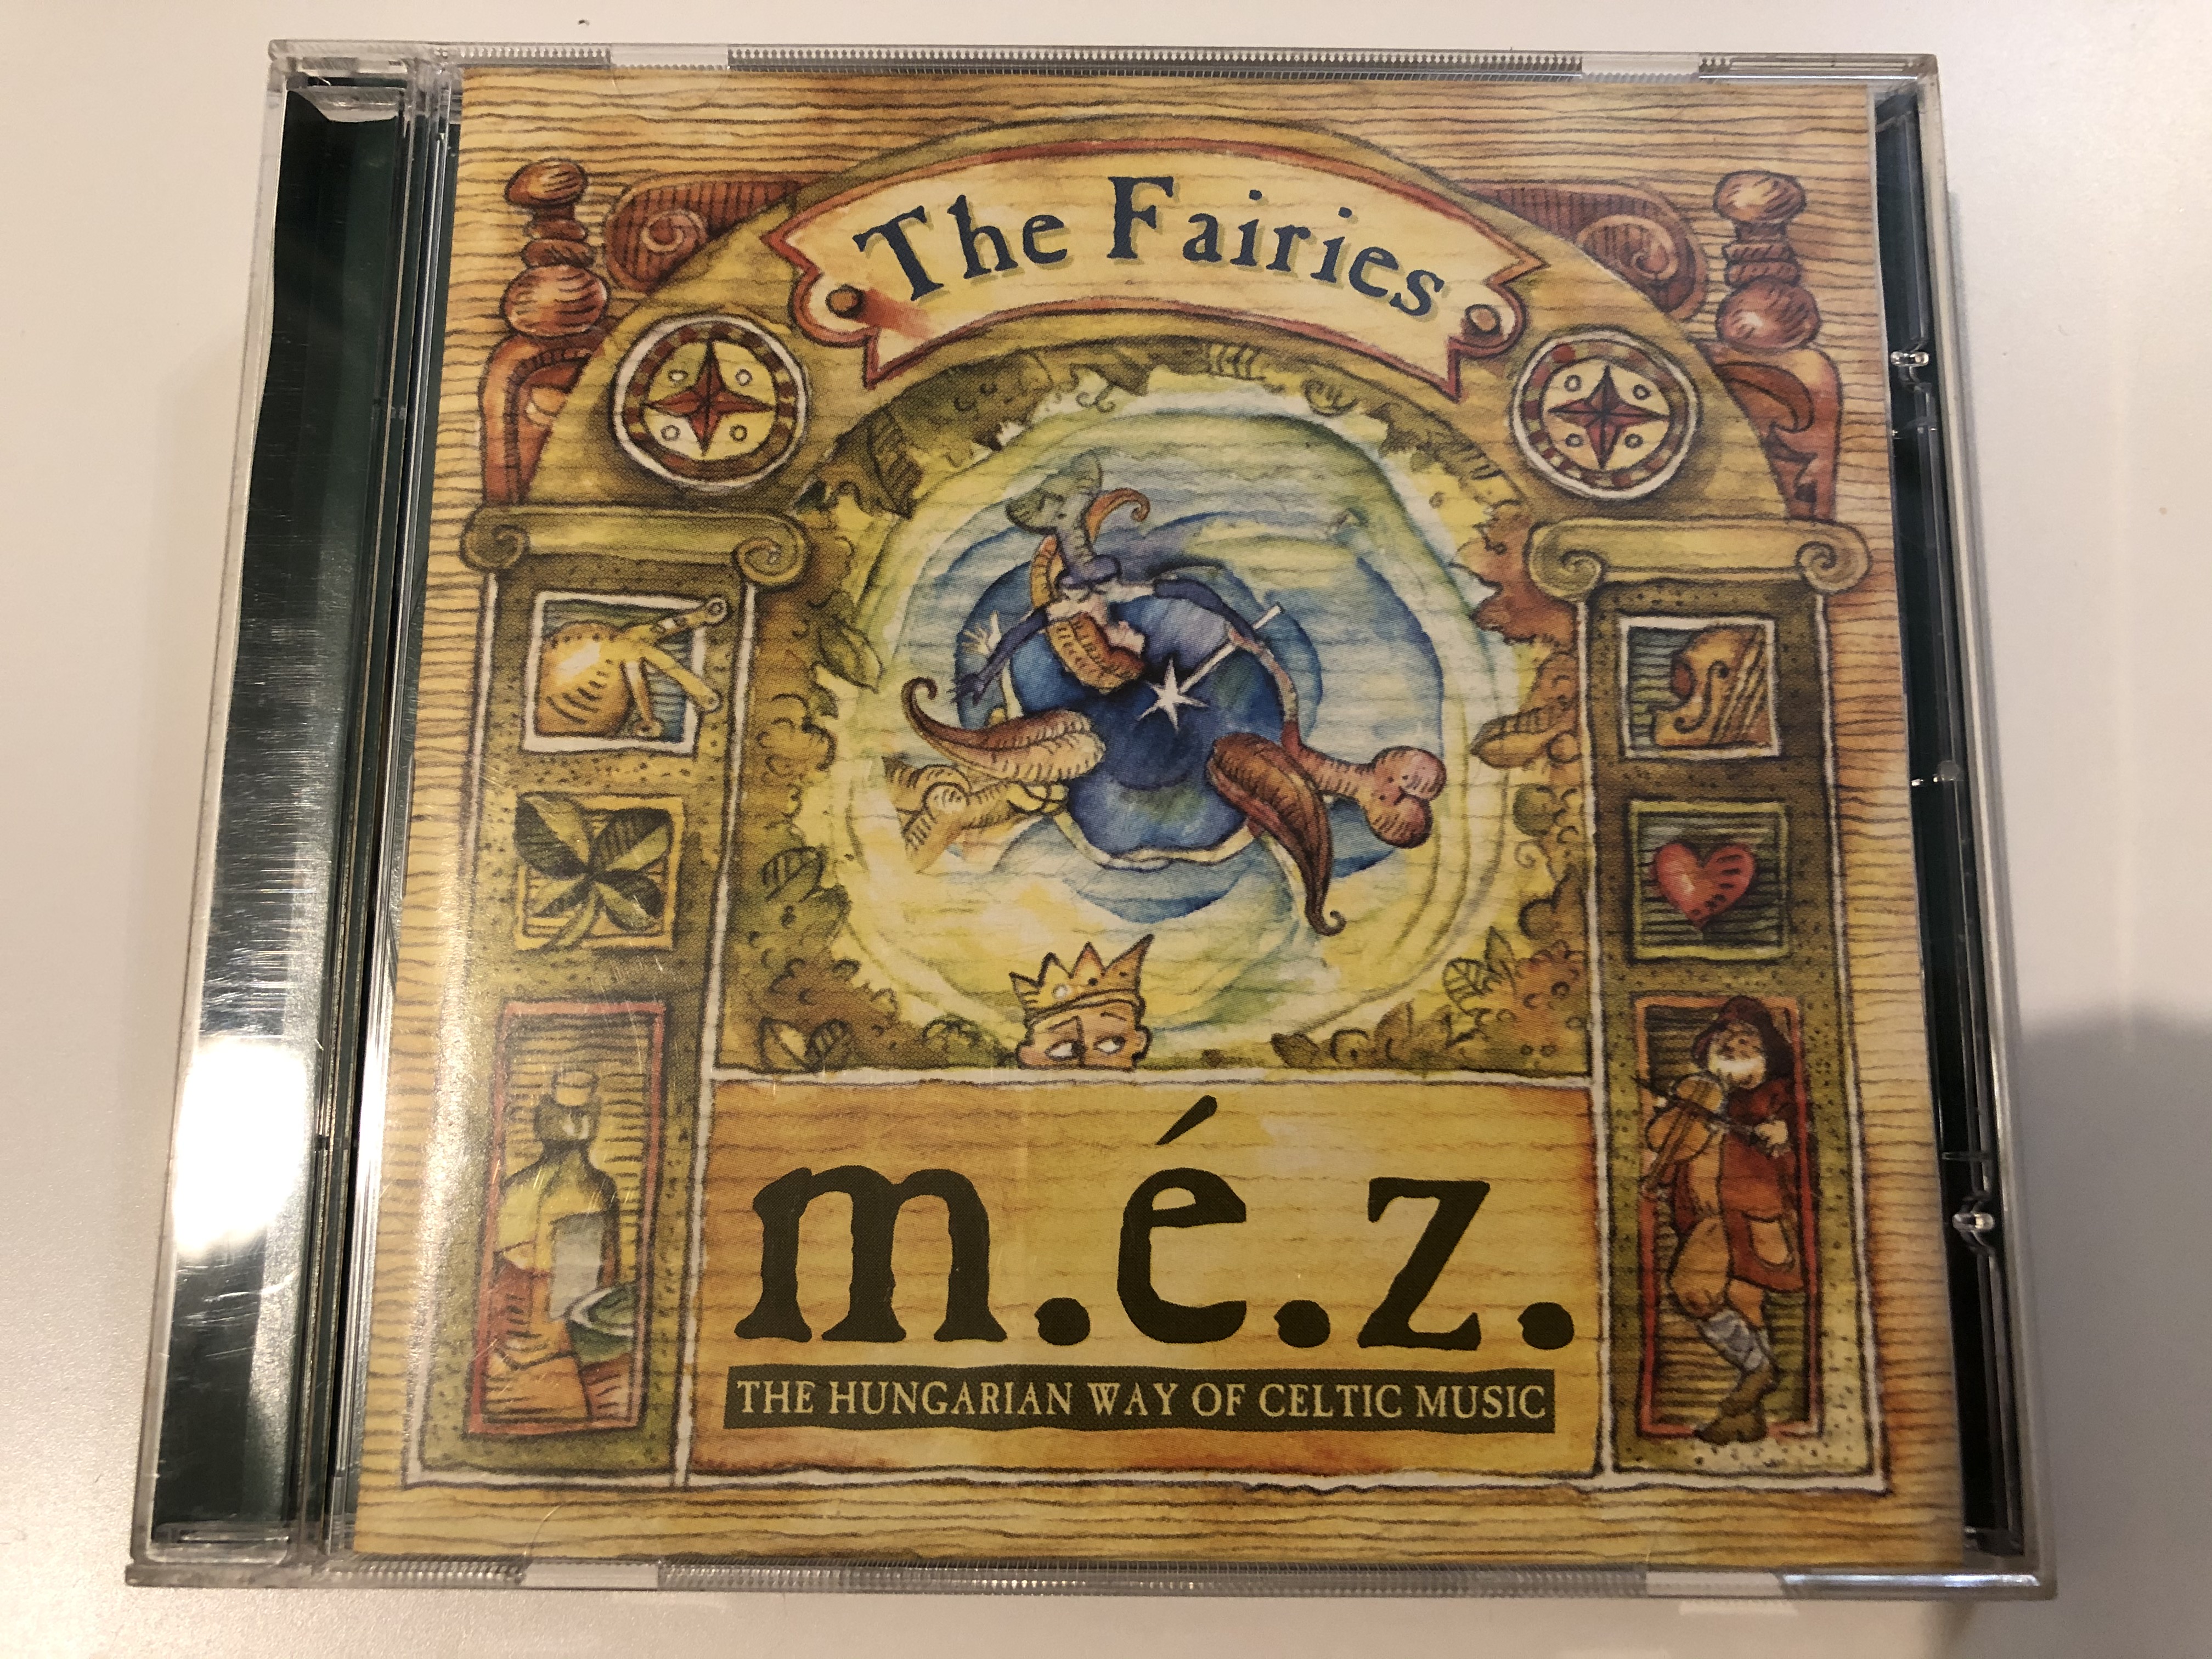 the-fairies-m.-.z.-the-hungarian-way-of-celtic-music-narrator-records-audio-cd-2000-nrr017-1-.jpg